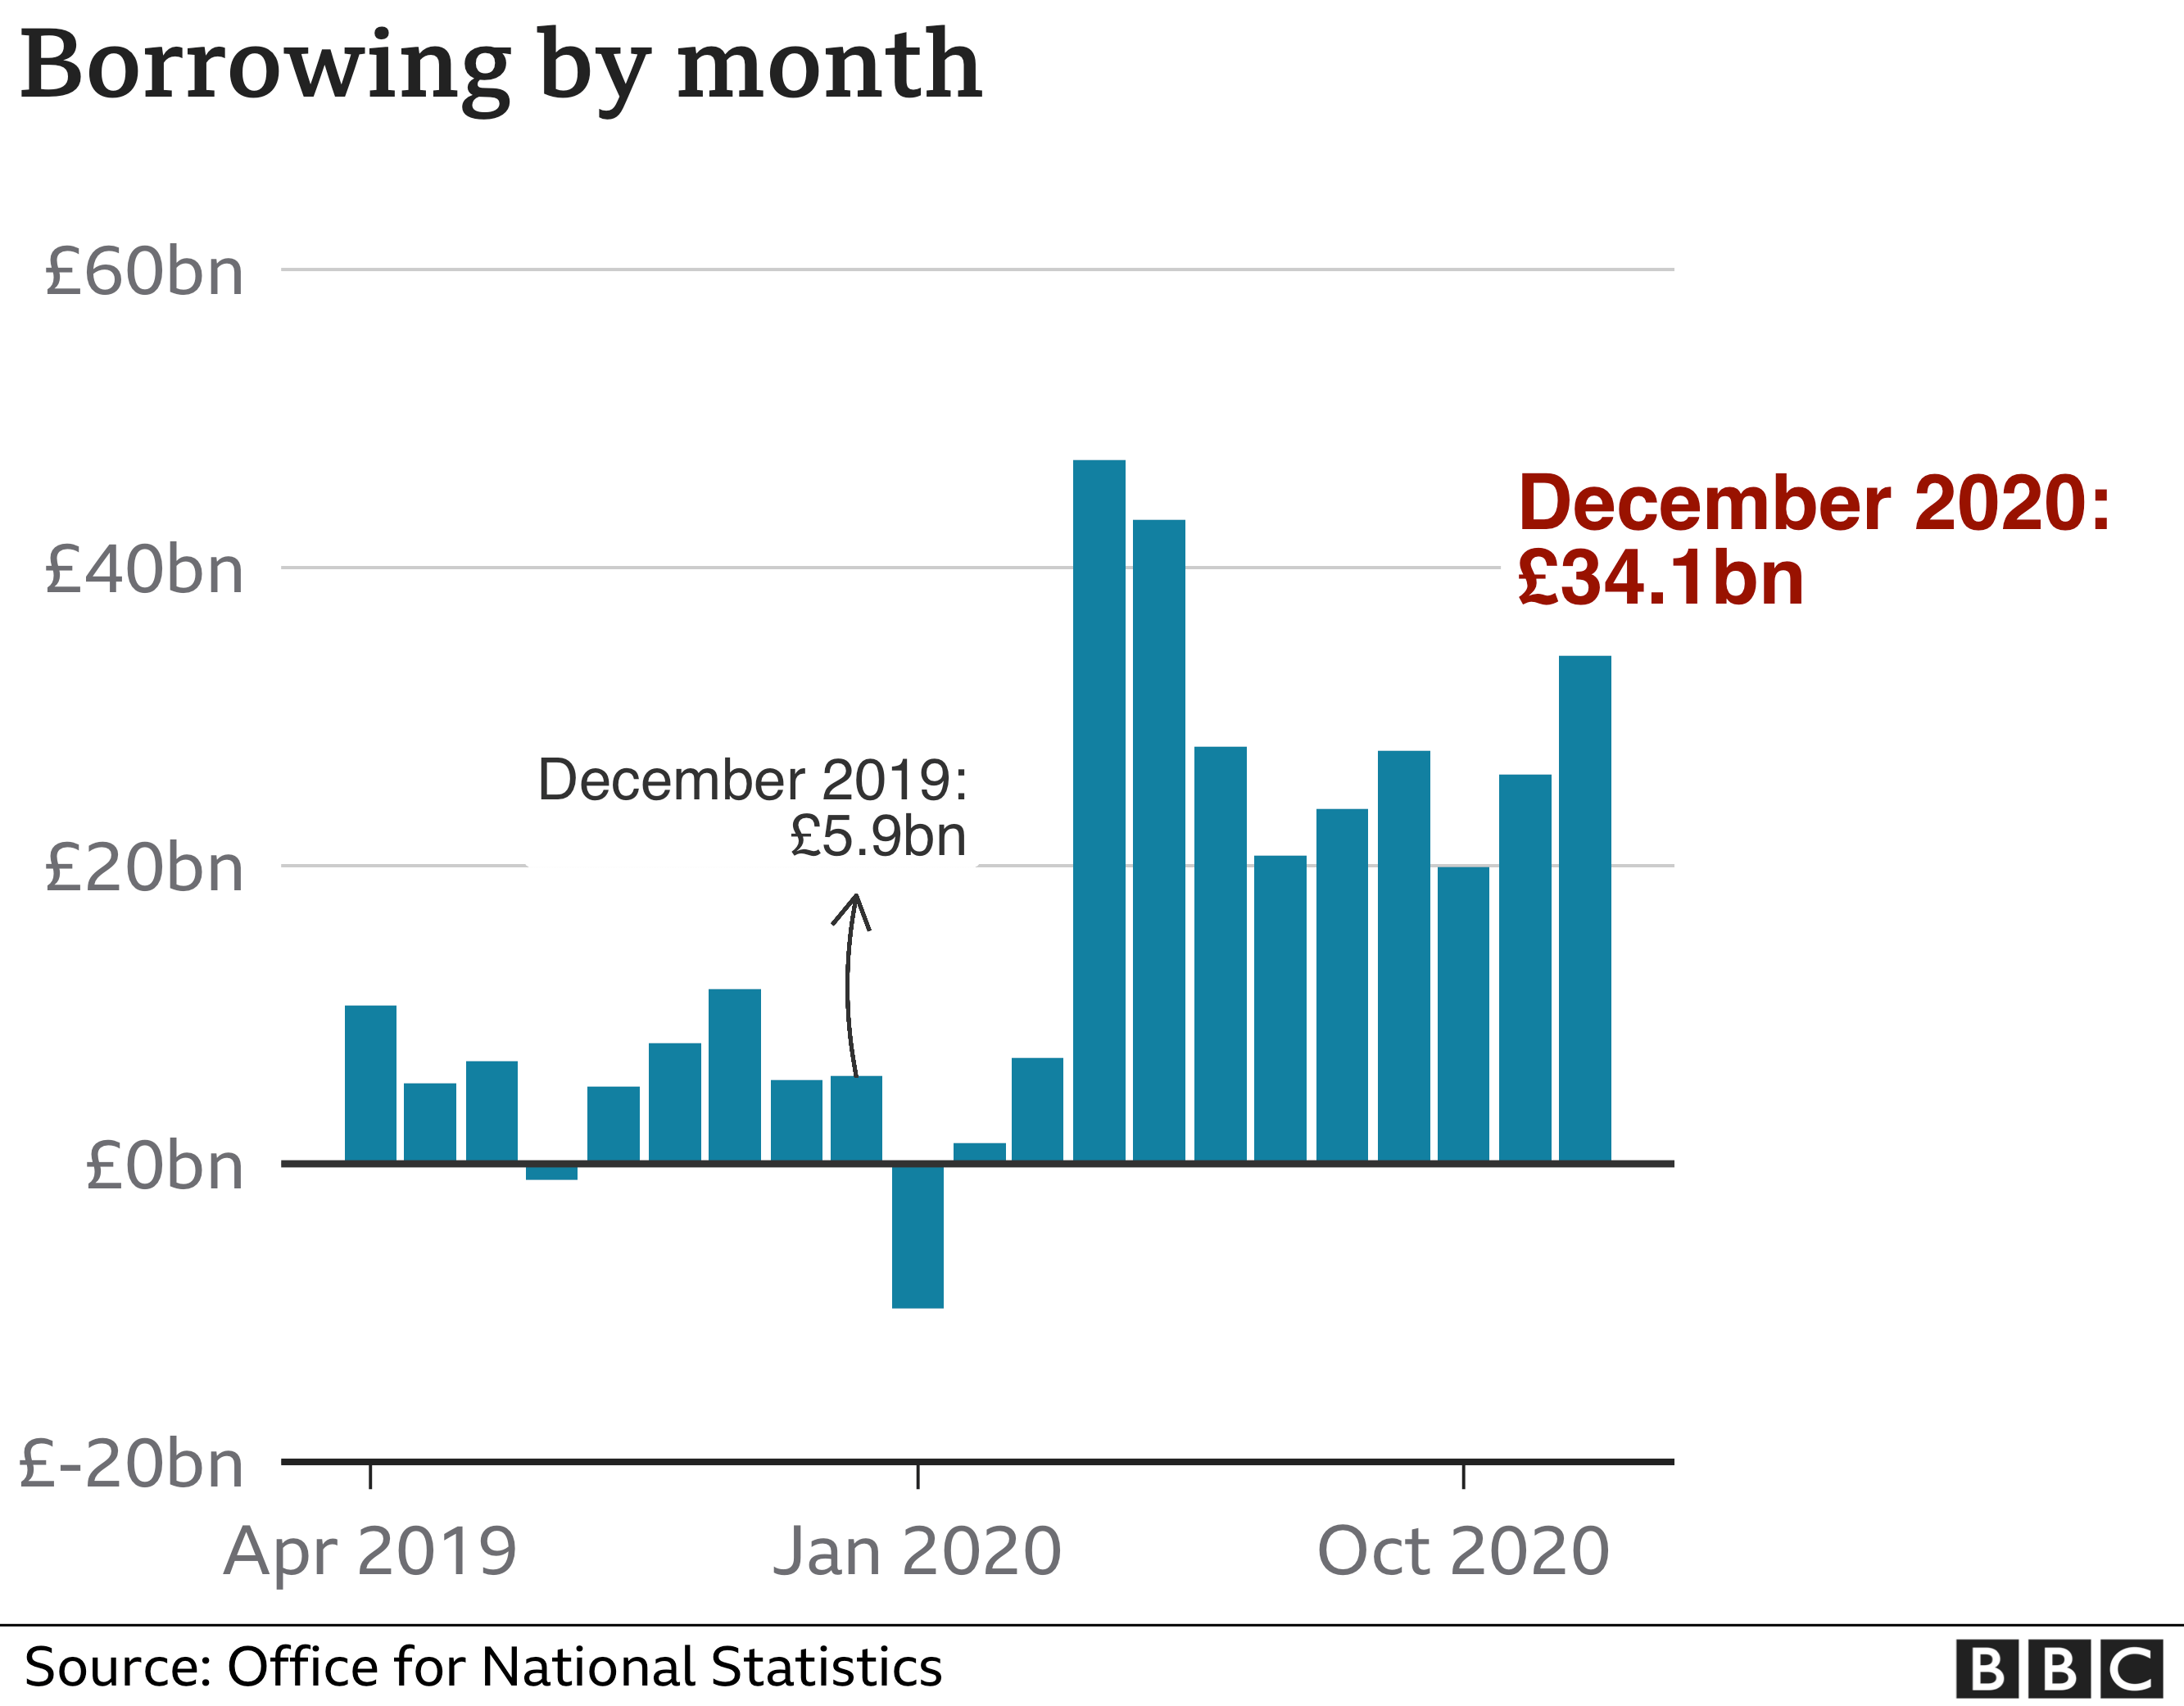 Borrowing by month bar chart